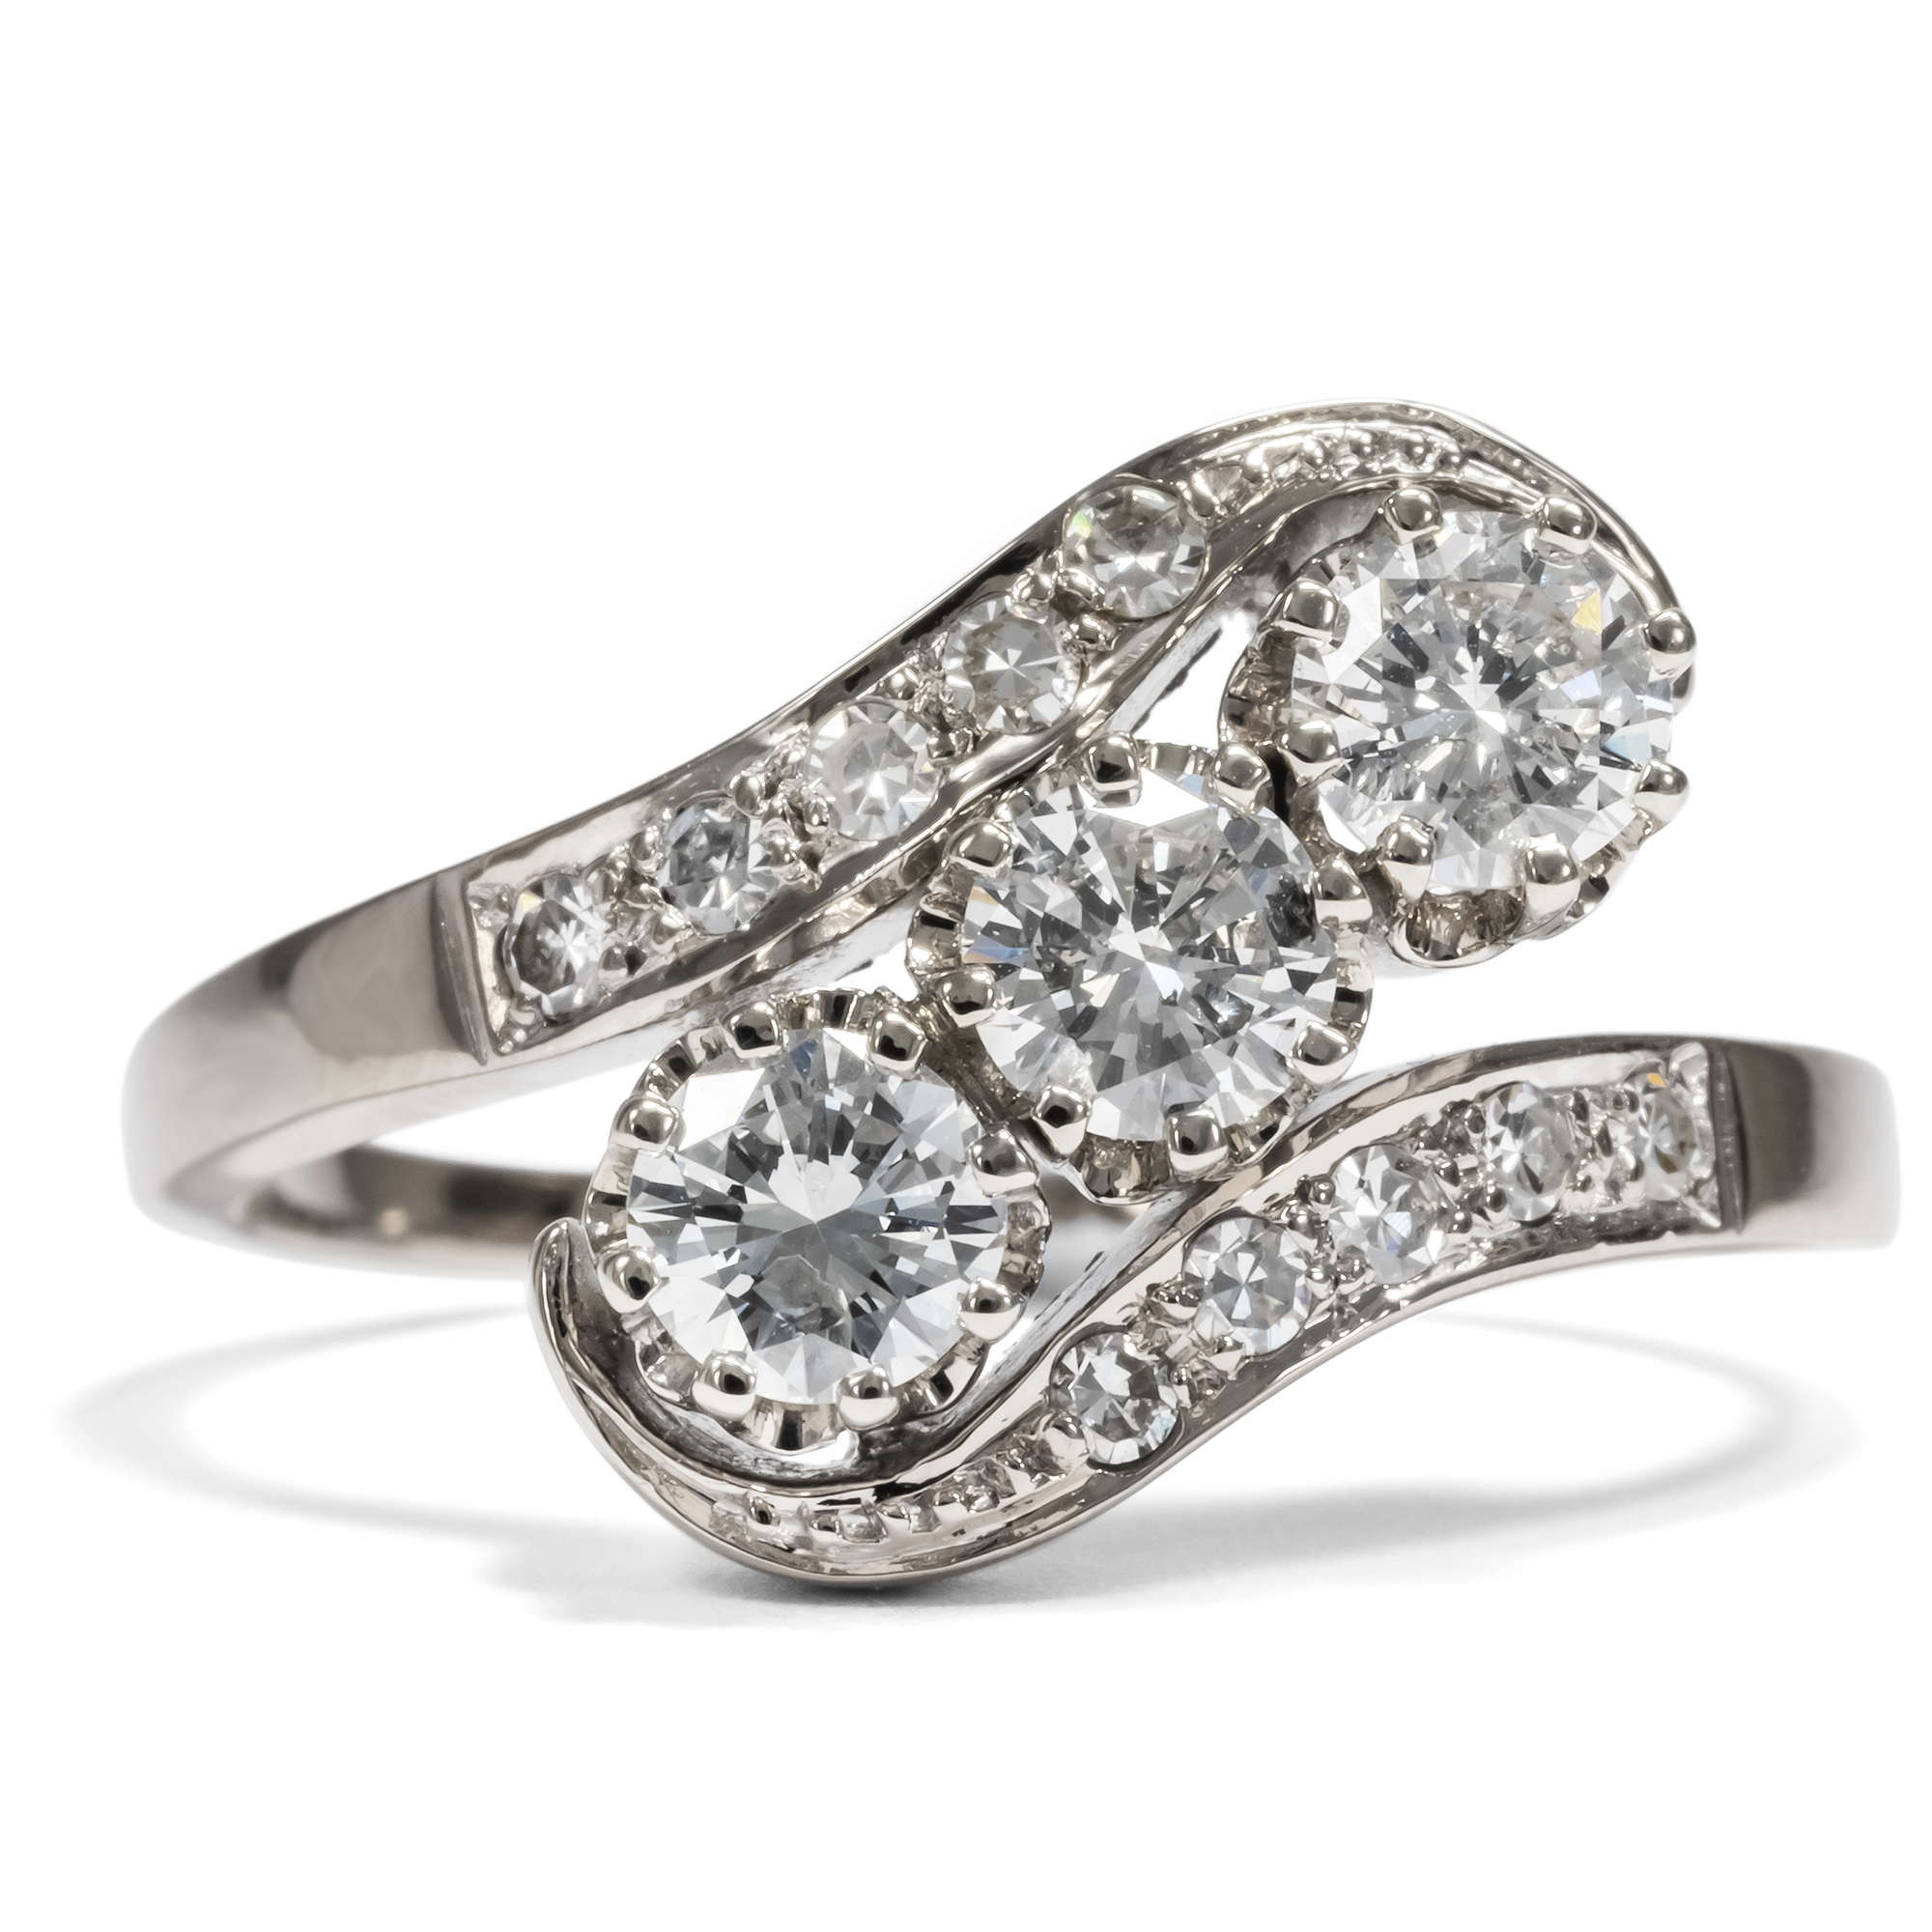 Luxury Vintage Trilogy Ring With Diamonds in White Gold, ca. 1965